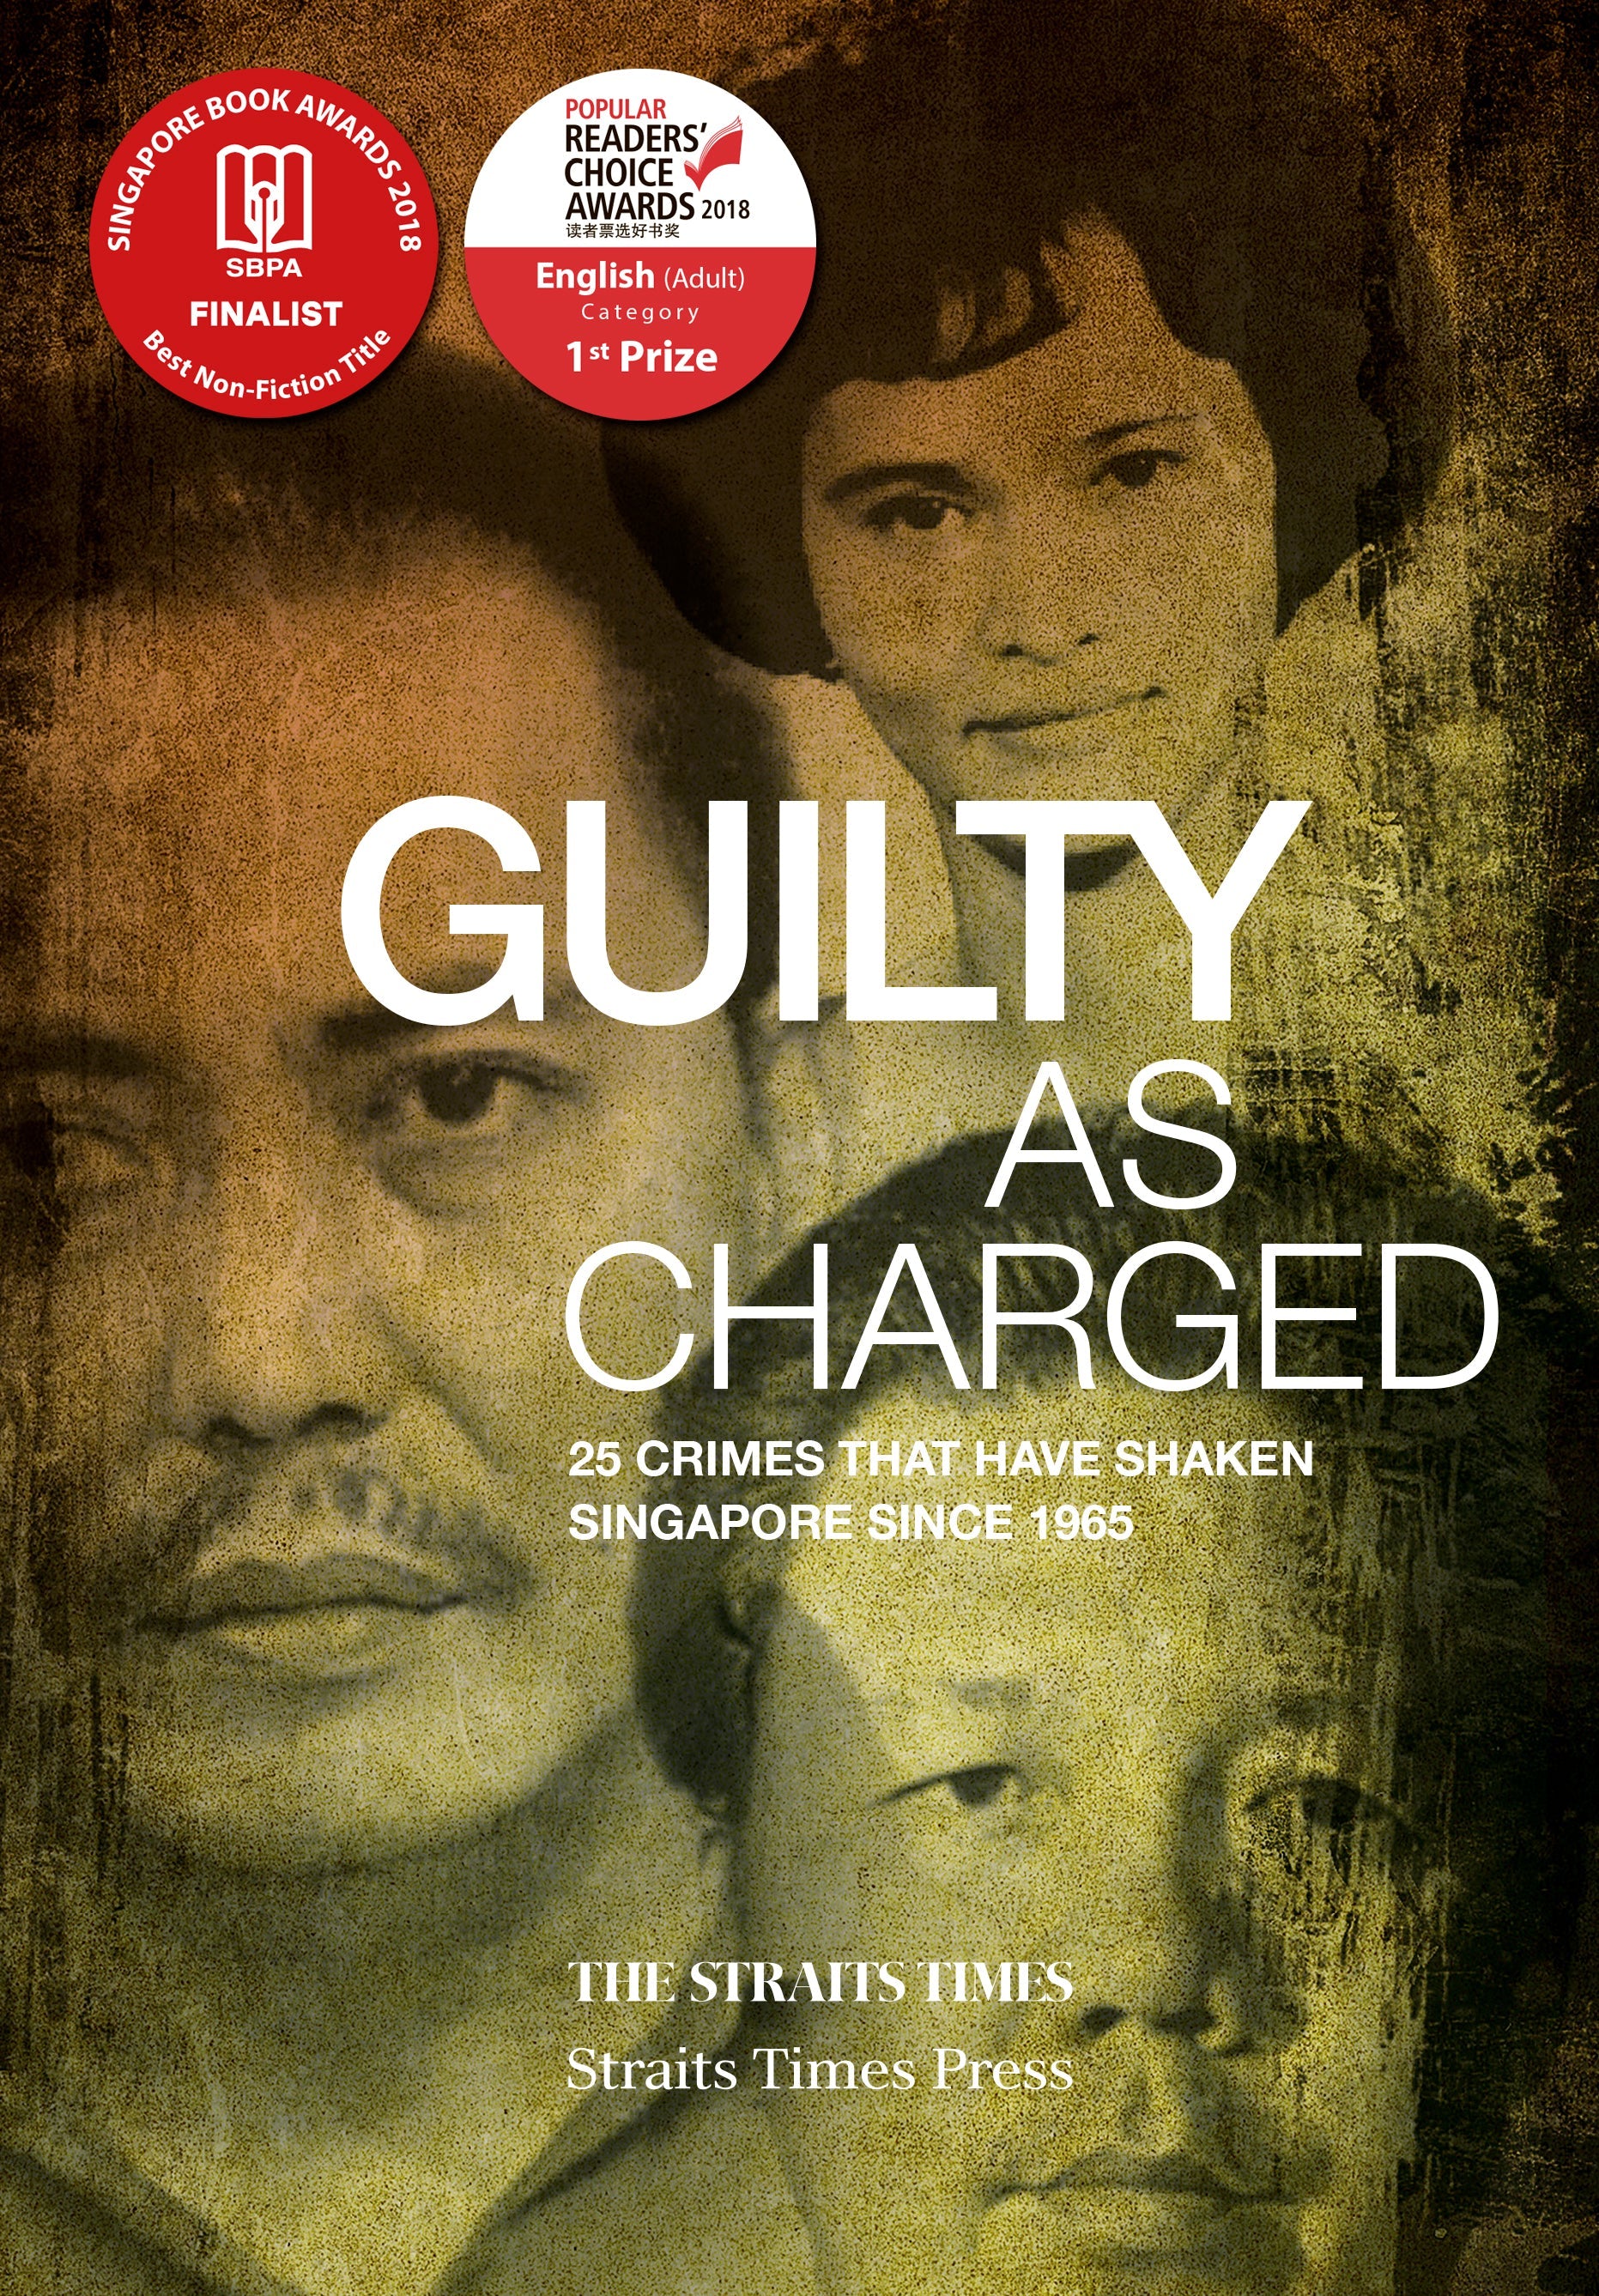 Guilty As Charged: 25 Crimes That Have Shaken Singapore Since 1965